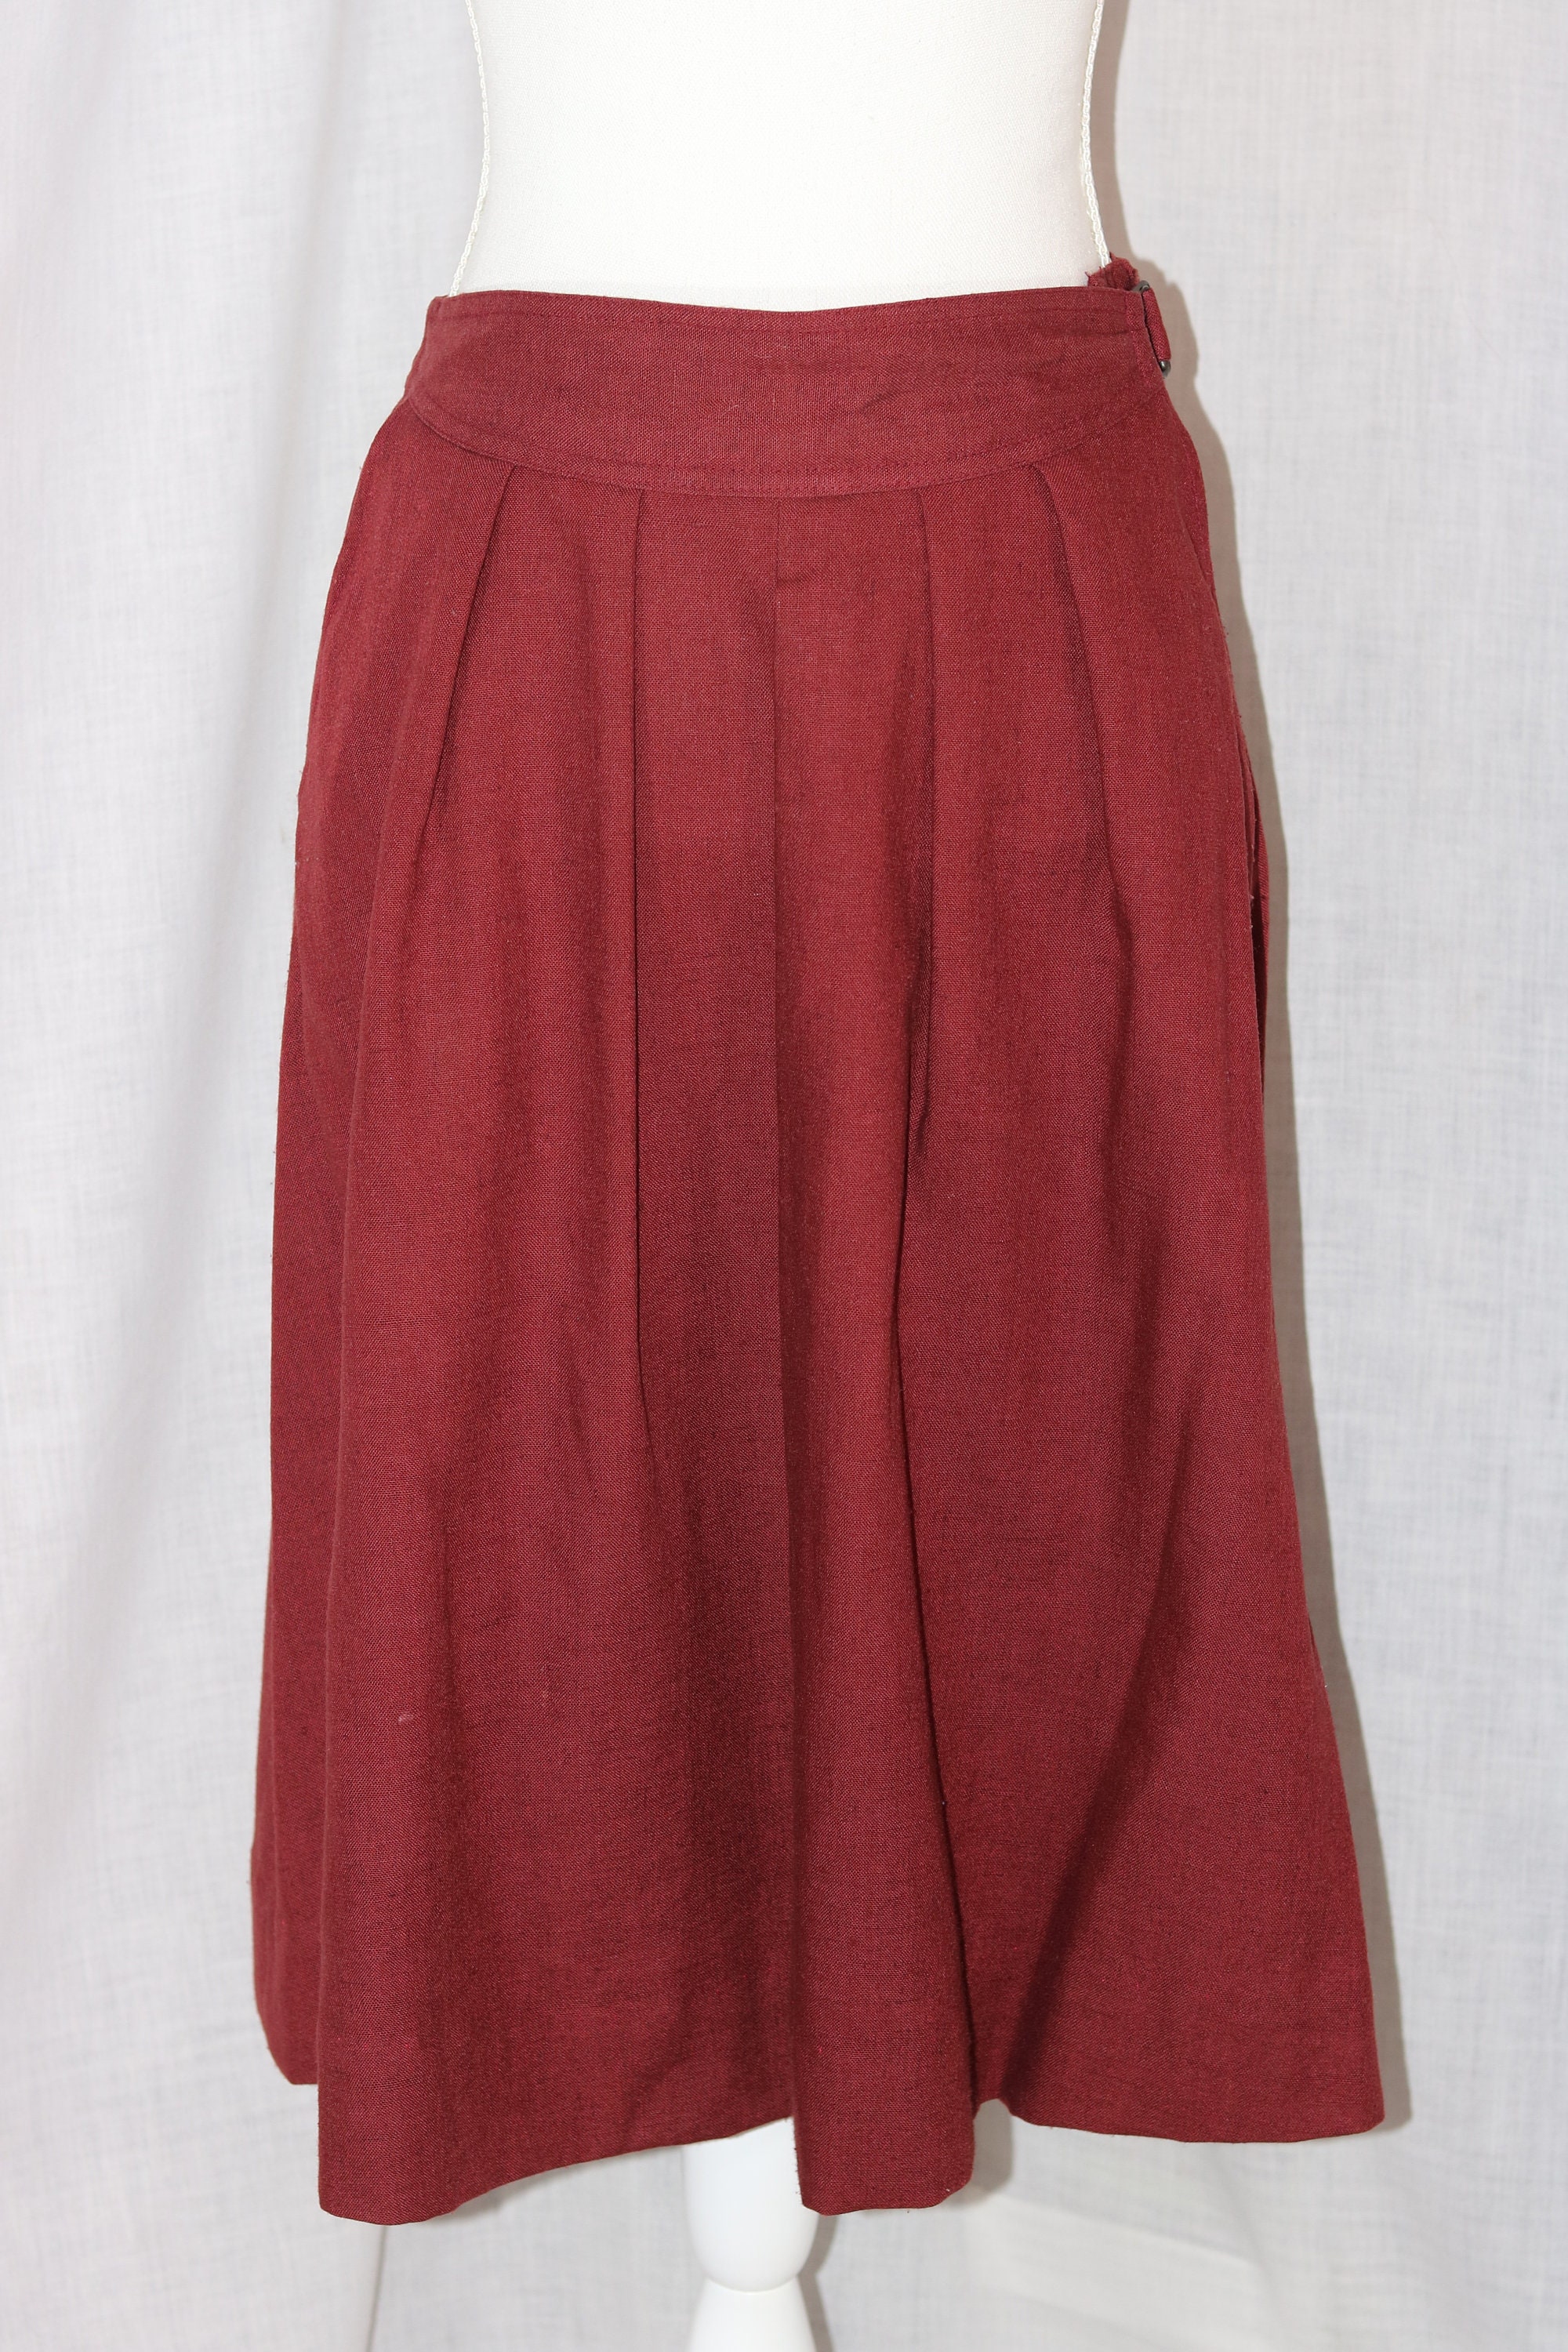 Vintage CAMPUS CASUALS of California Red Rayon Blend Skirt - Etsy